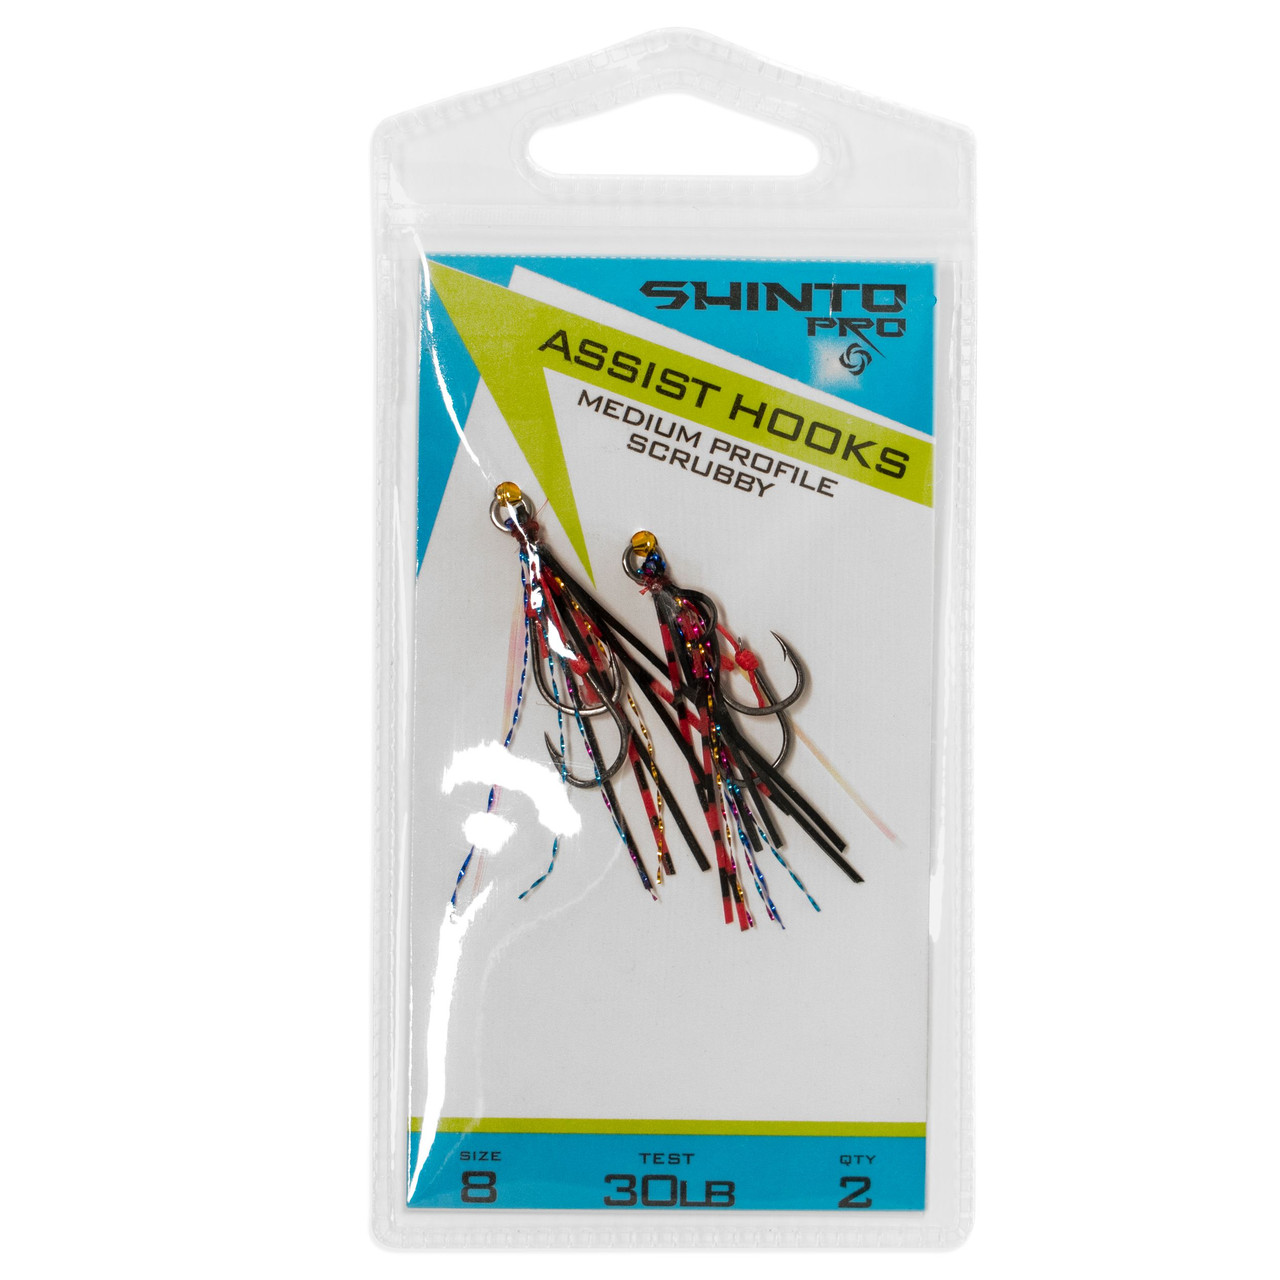 Shinto Pro Micro Assist Hooks Offset Double - Scrubby